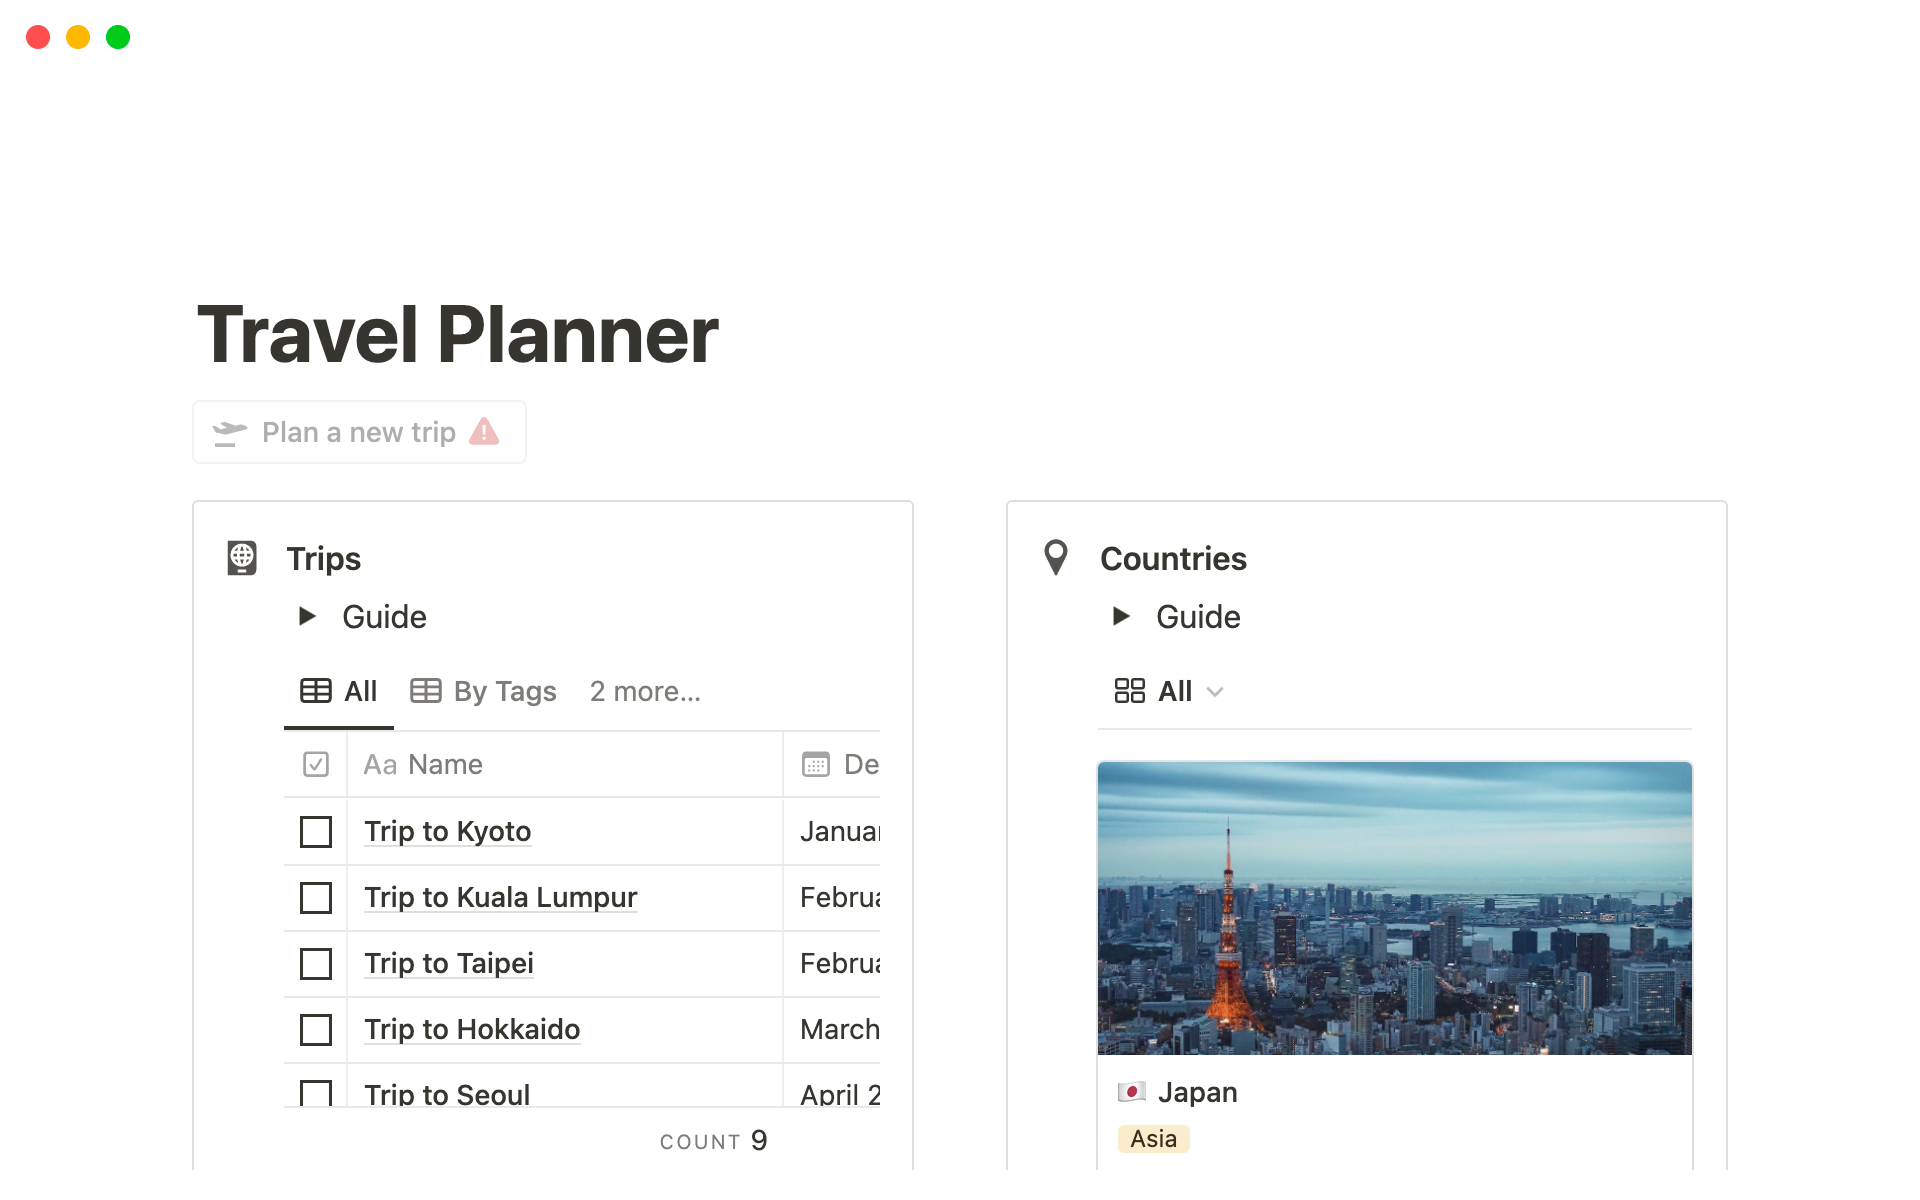 Helps people to organize and plan their trips.